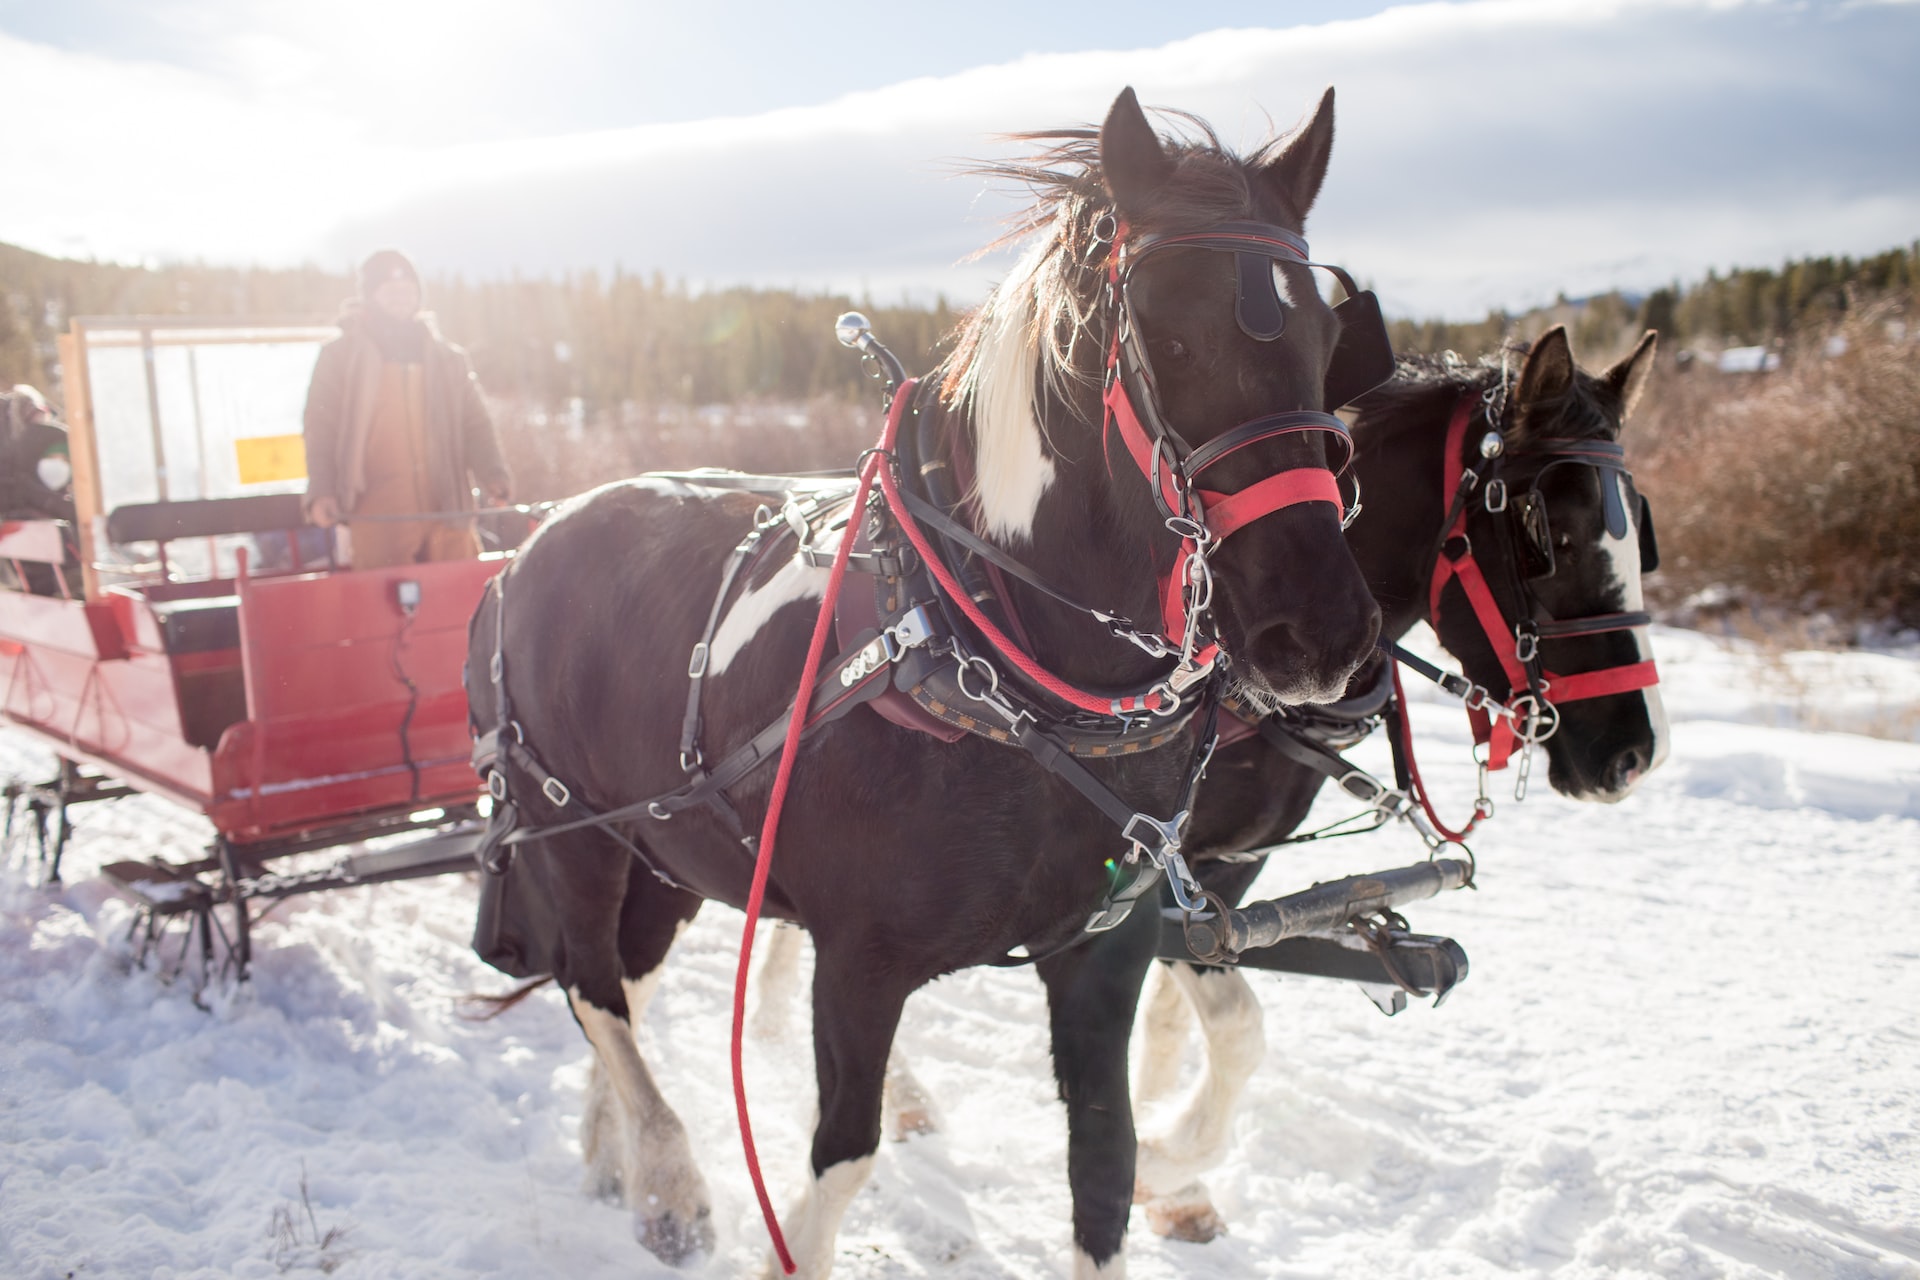 A close-up shot of two horses leading a sleigh in the winter.